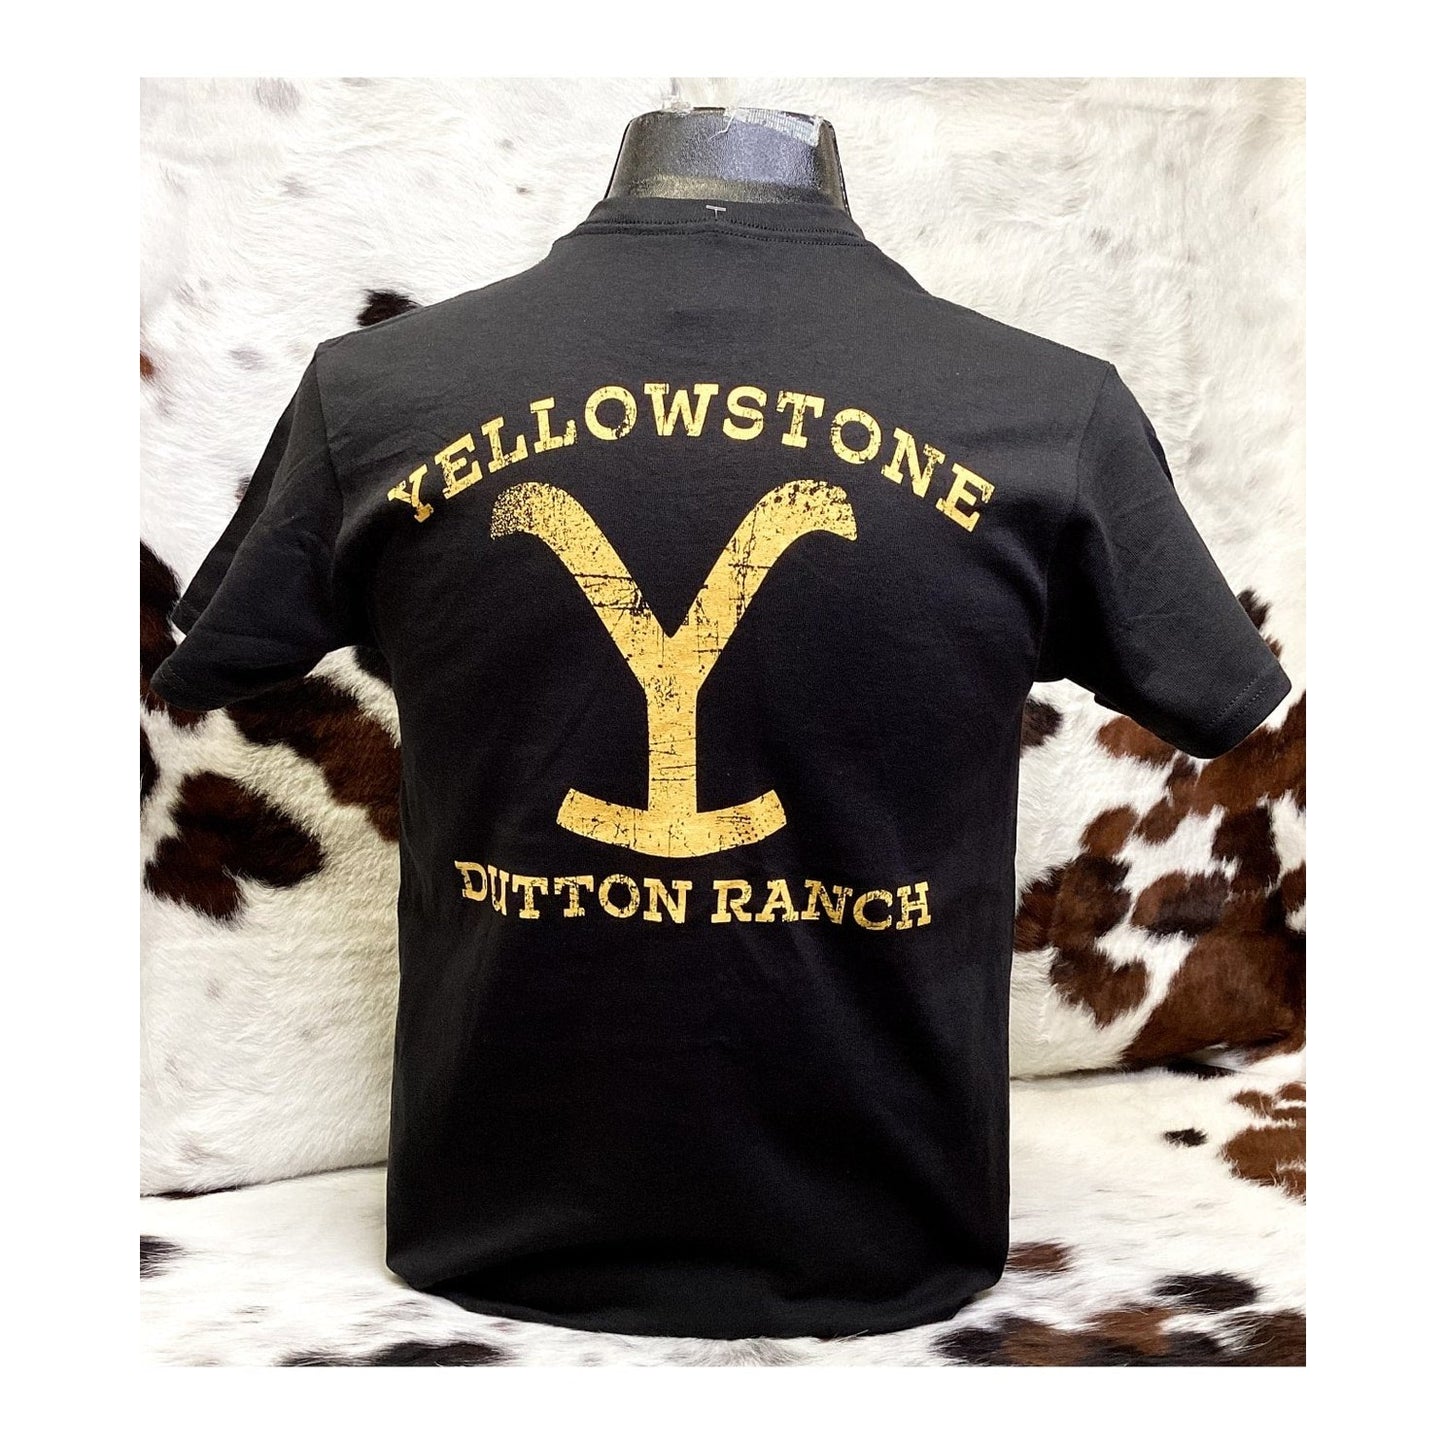 Changes Licensed Yellowstone Unisex T-Shirt Dutton Ranch 66-331-42 - Changes Licensed Apparel